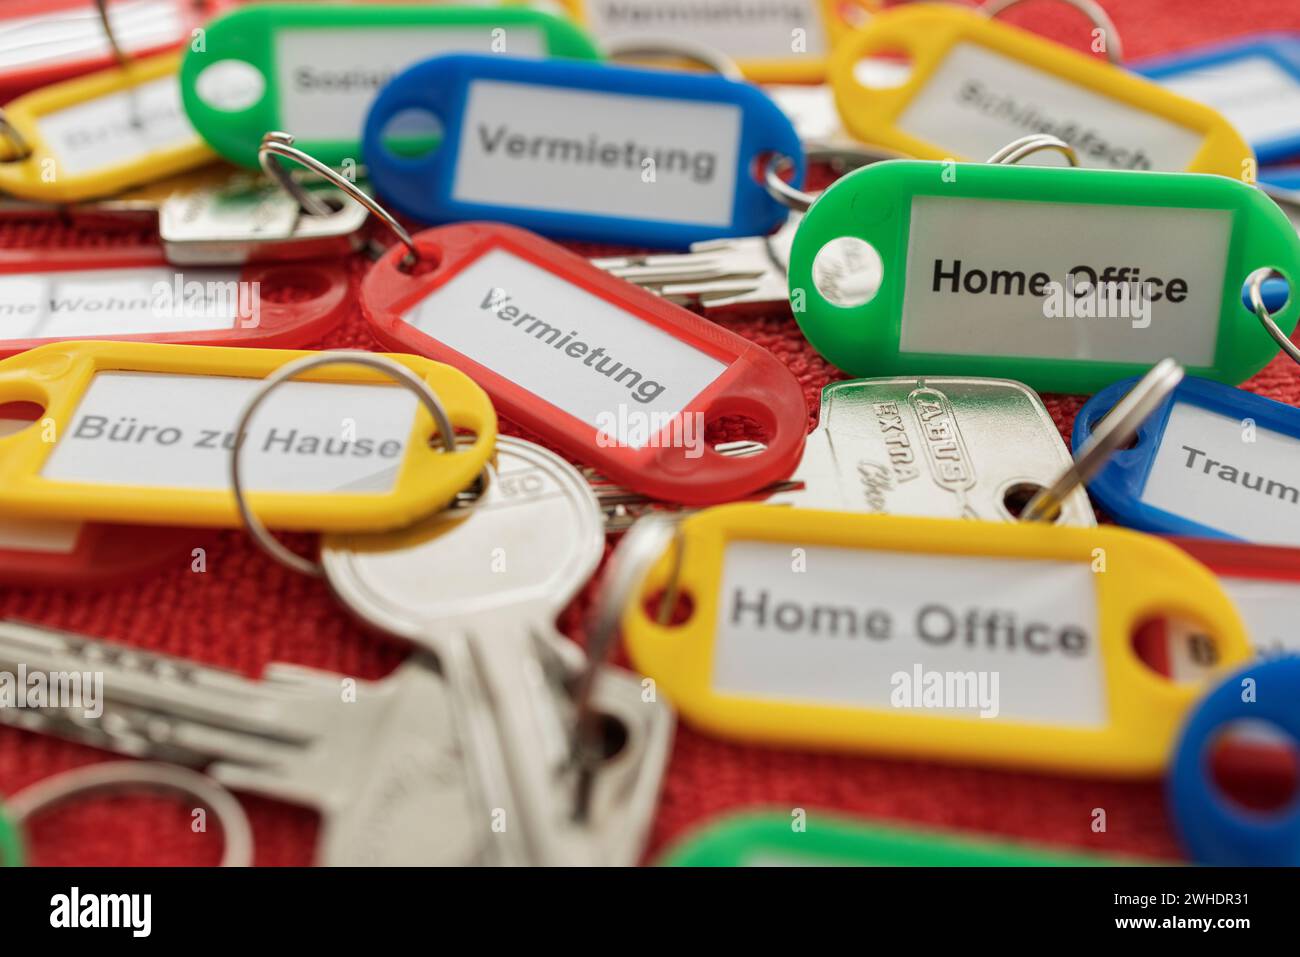 Various keys with key fob, different colors, labeled, detail, dimple key, red background, Stock Photo